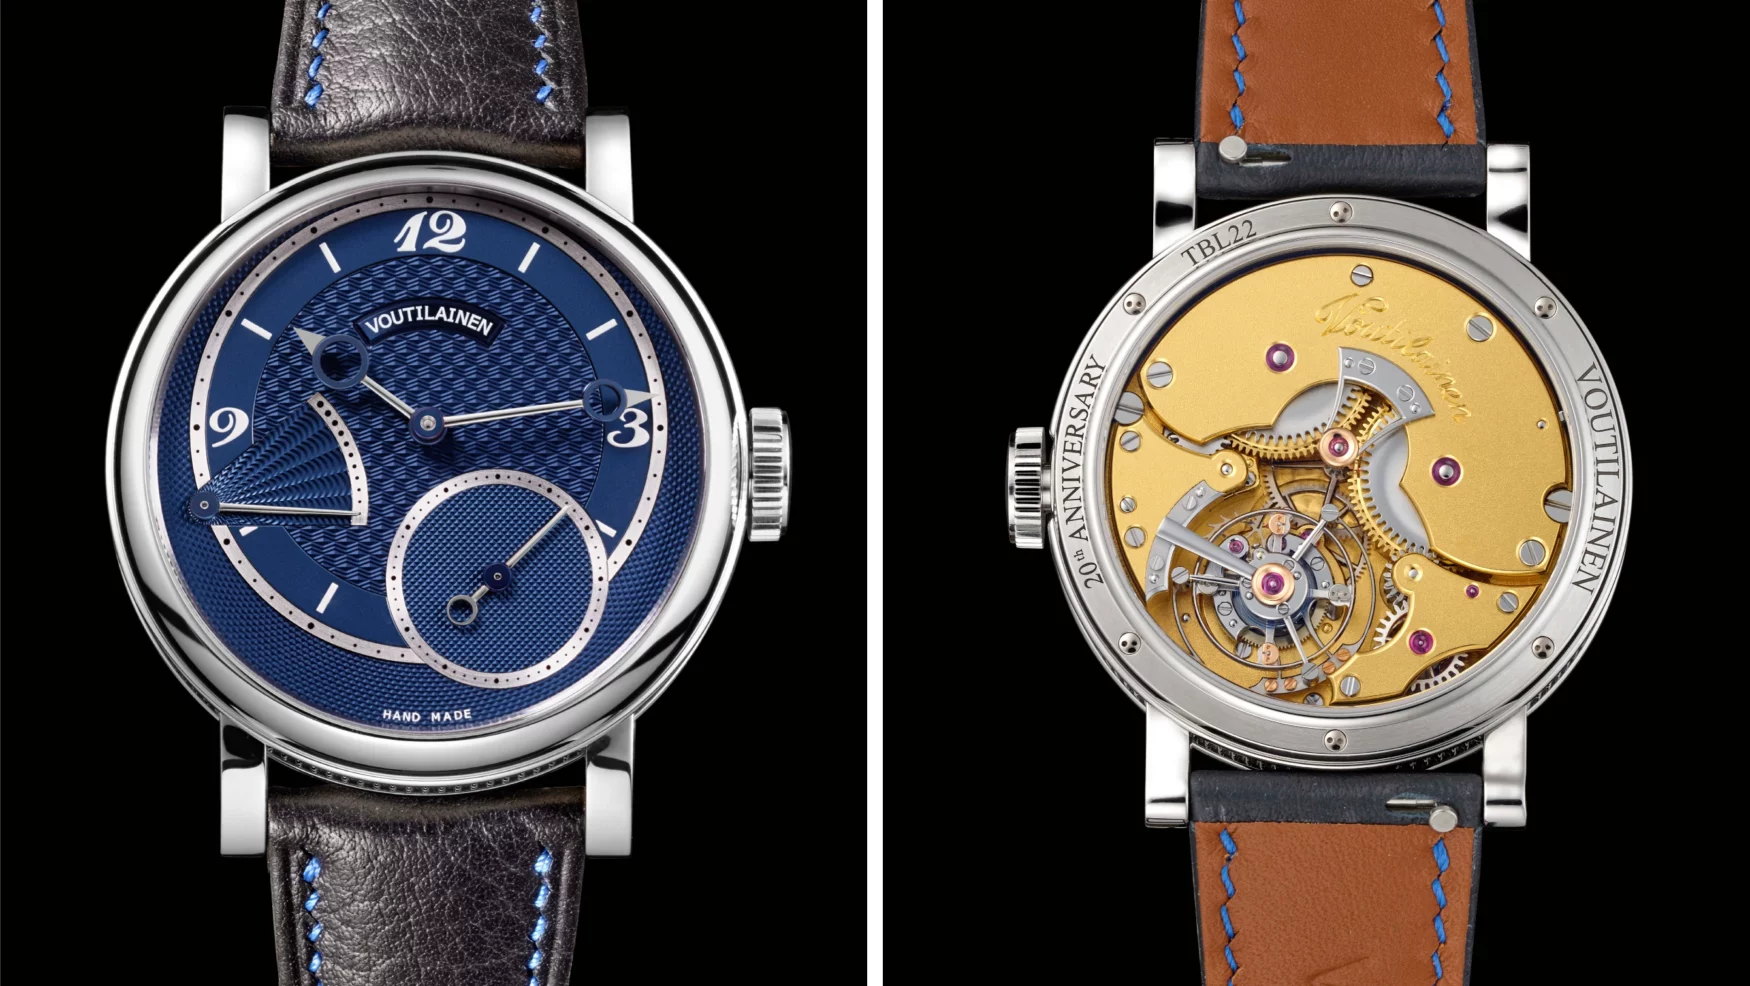 Kari Voutilainen quietly released his 20th Anniversary Tourbillon, tributing his first-ever watch